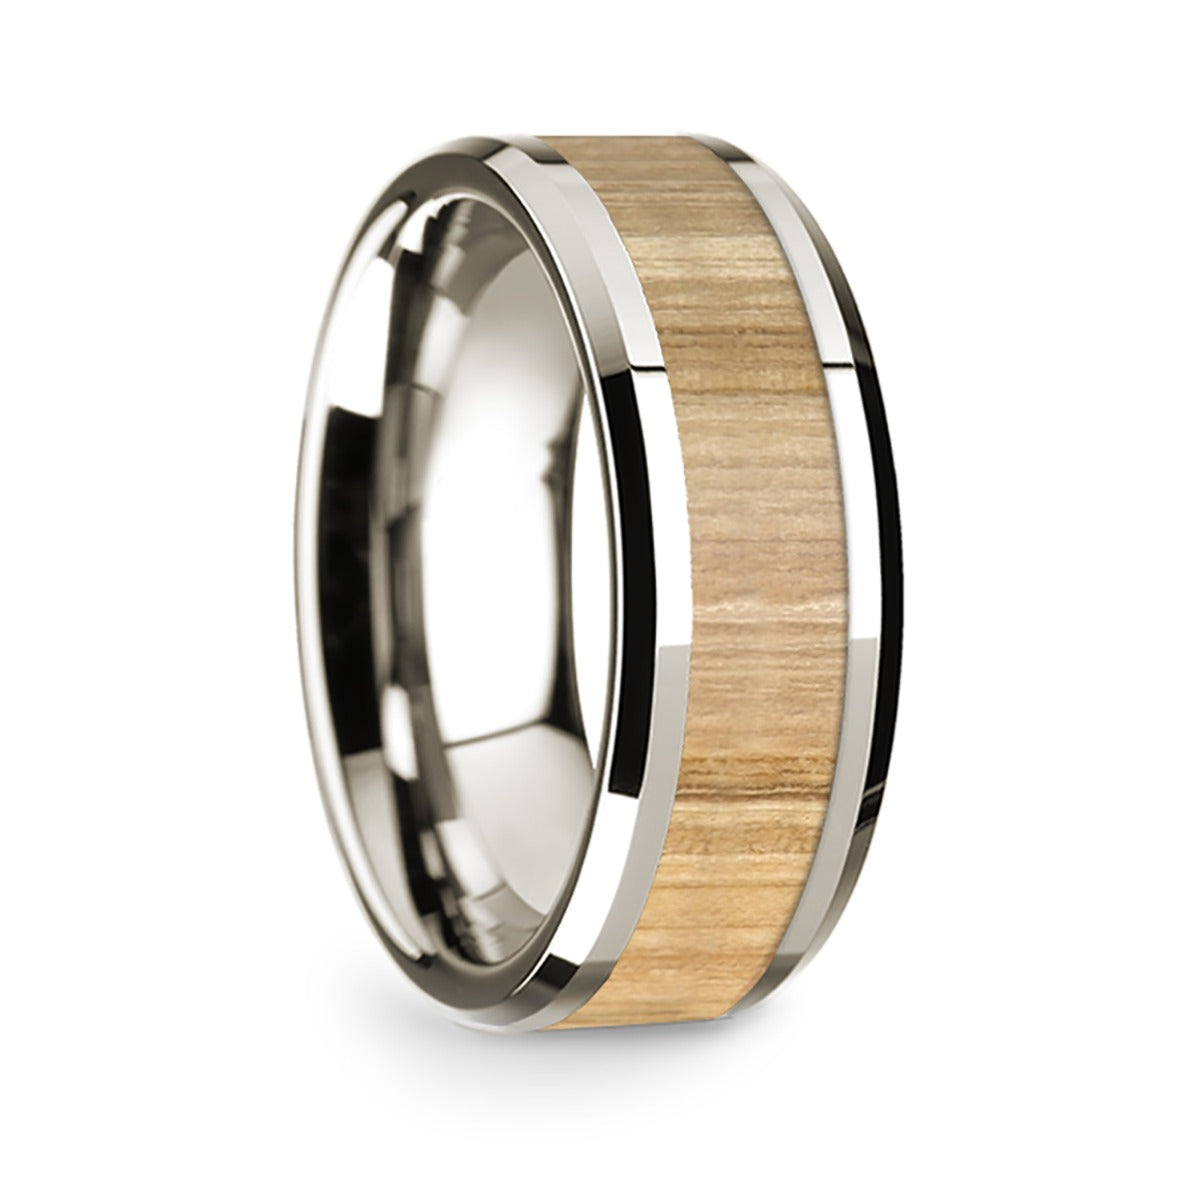 14k White Gold Men's Wedding Band with Ash Wood Inlay